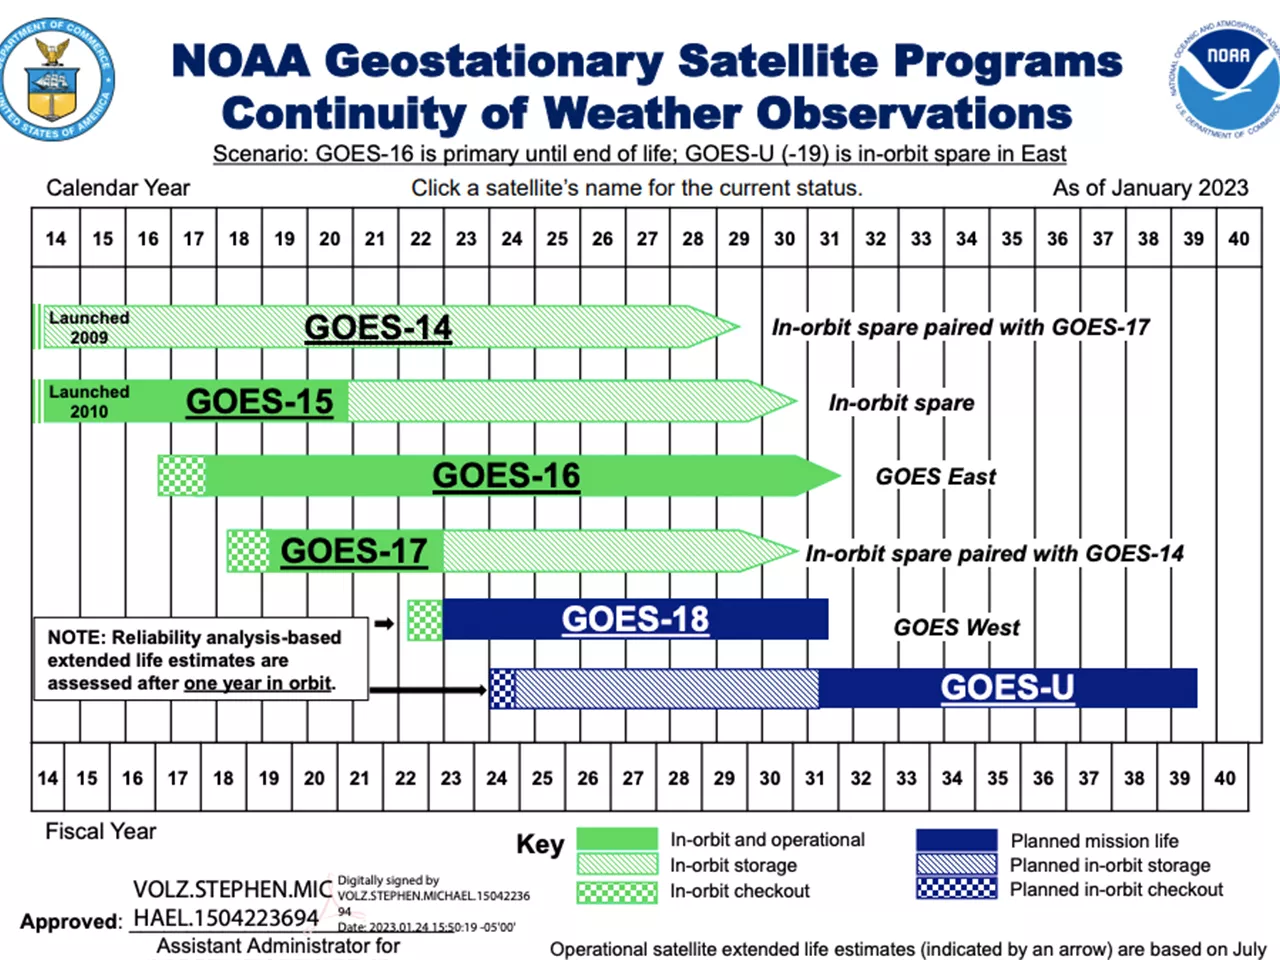 Image of the GEO Flyout chart